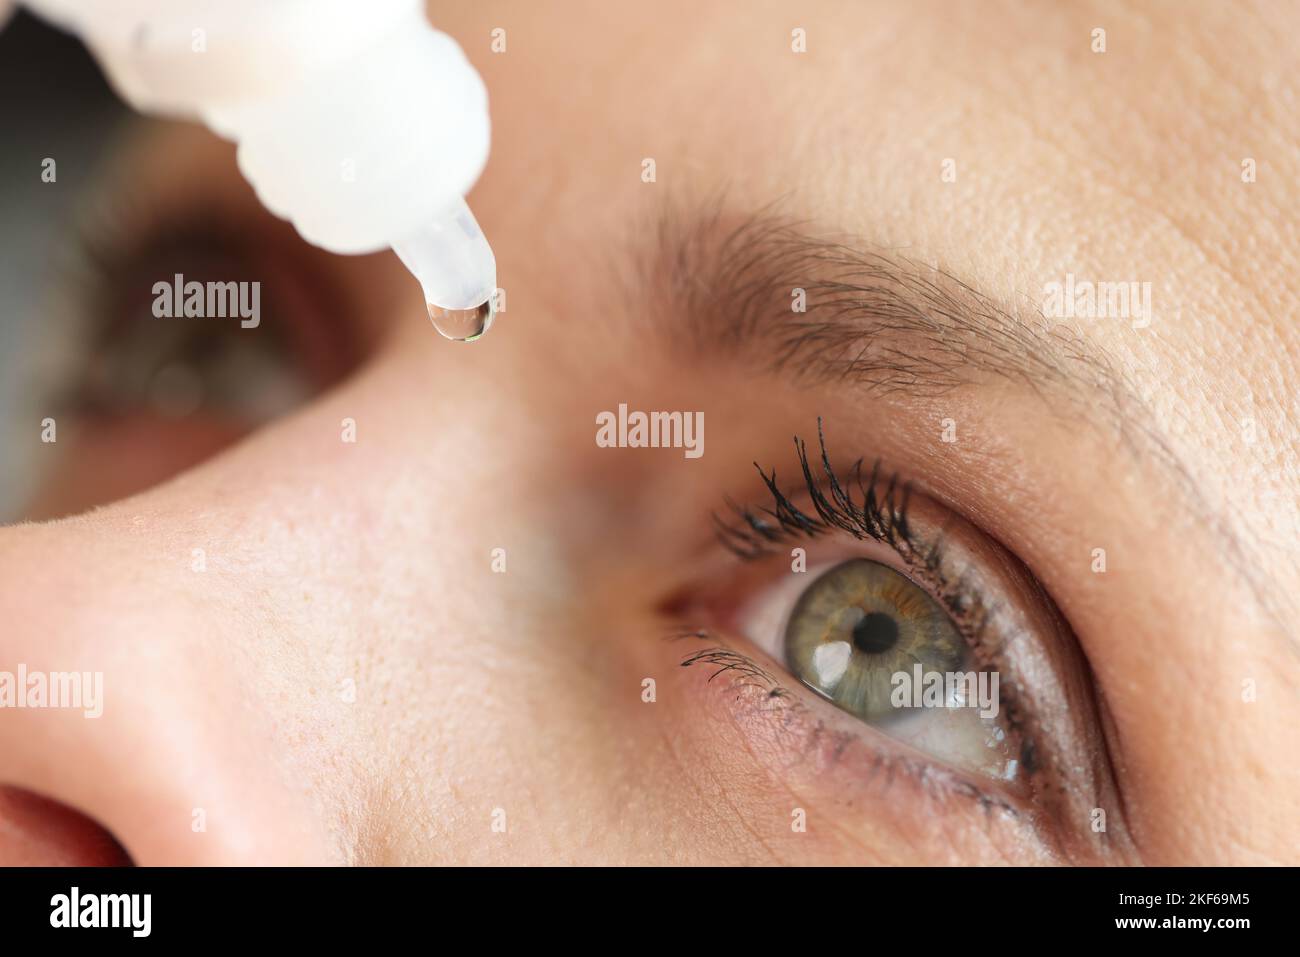 Caucasian woman using medical drops and dripping eye close up. Stock Photo